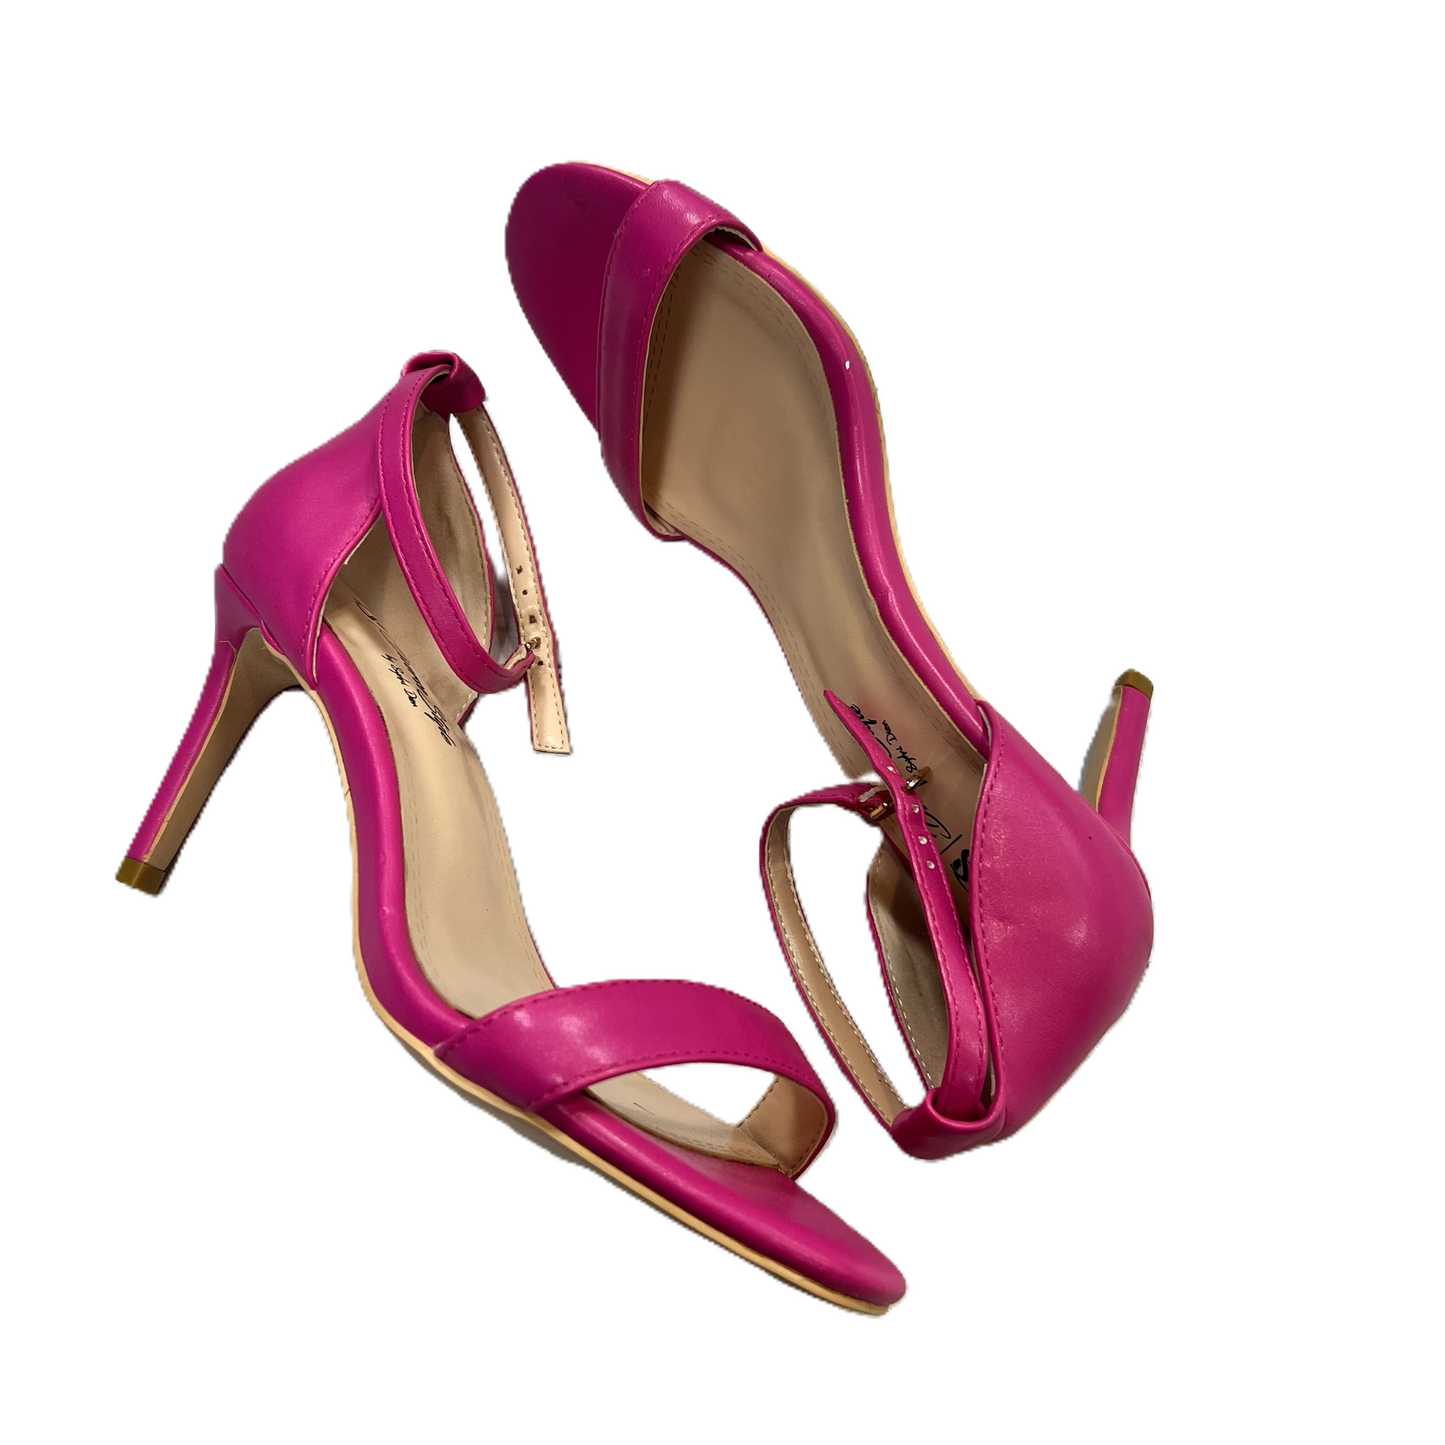 Pink Shoes Heels Stiletto By Clothes Mentor, Size: 7